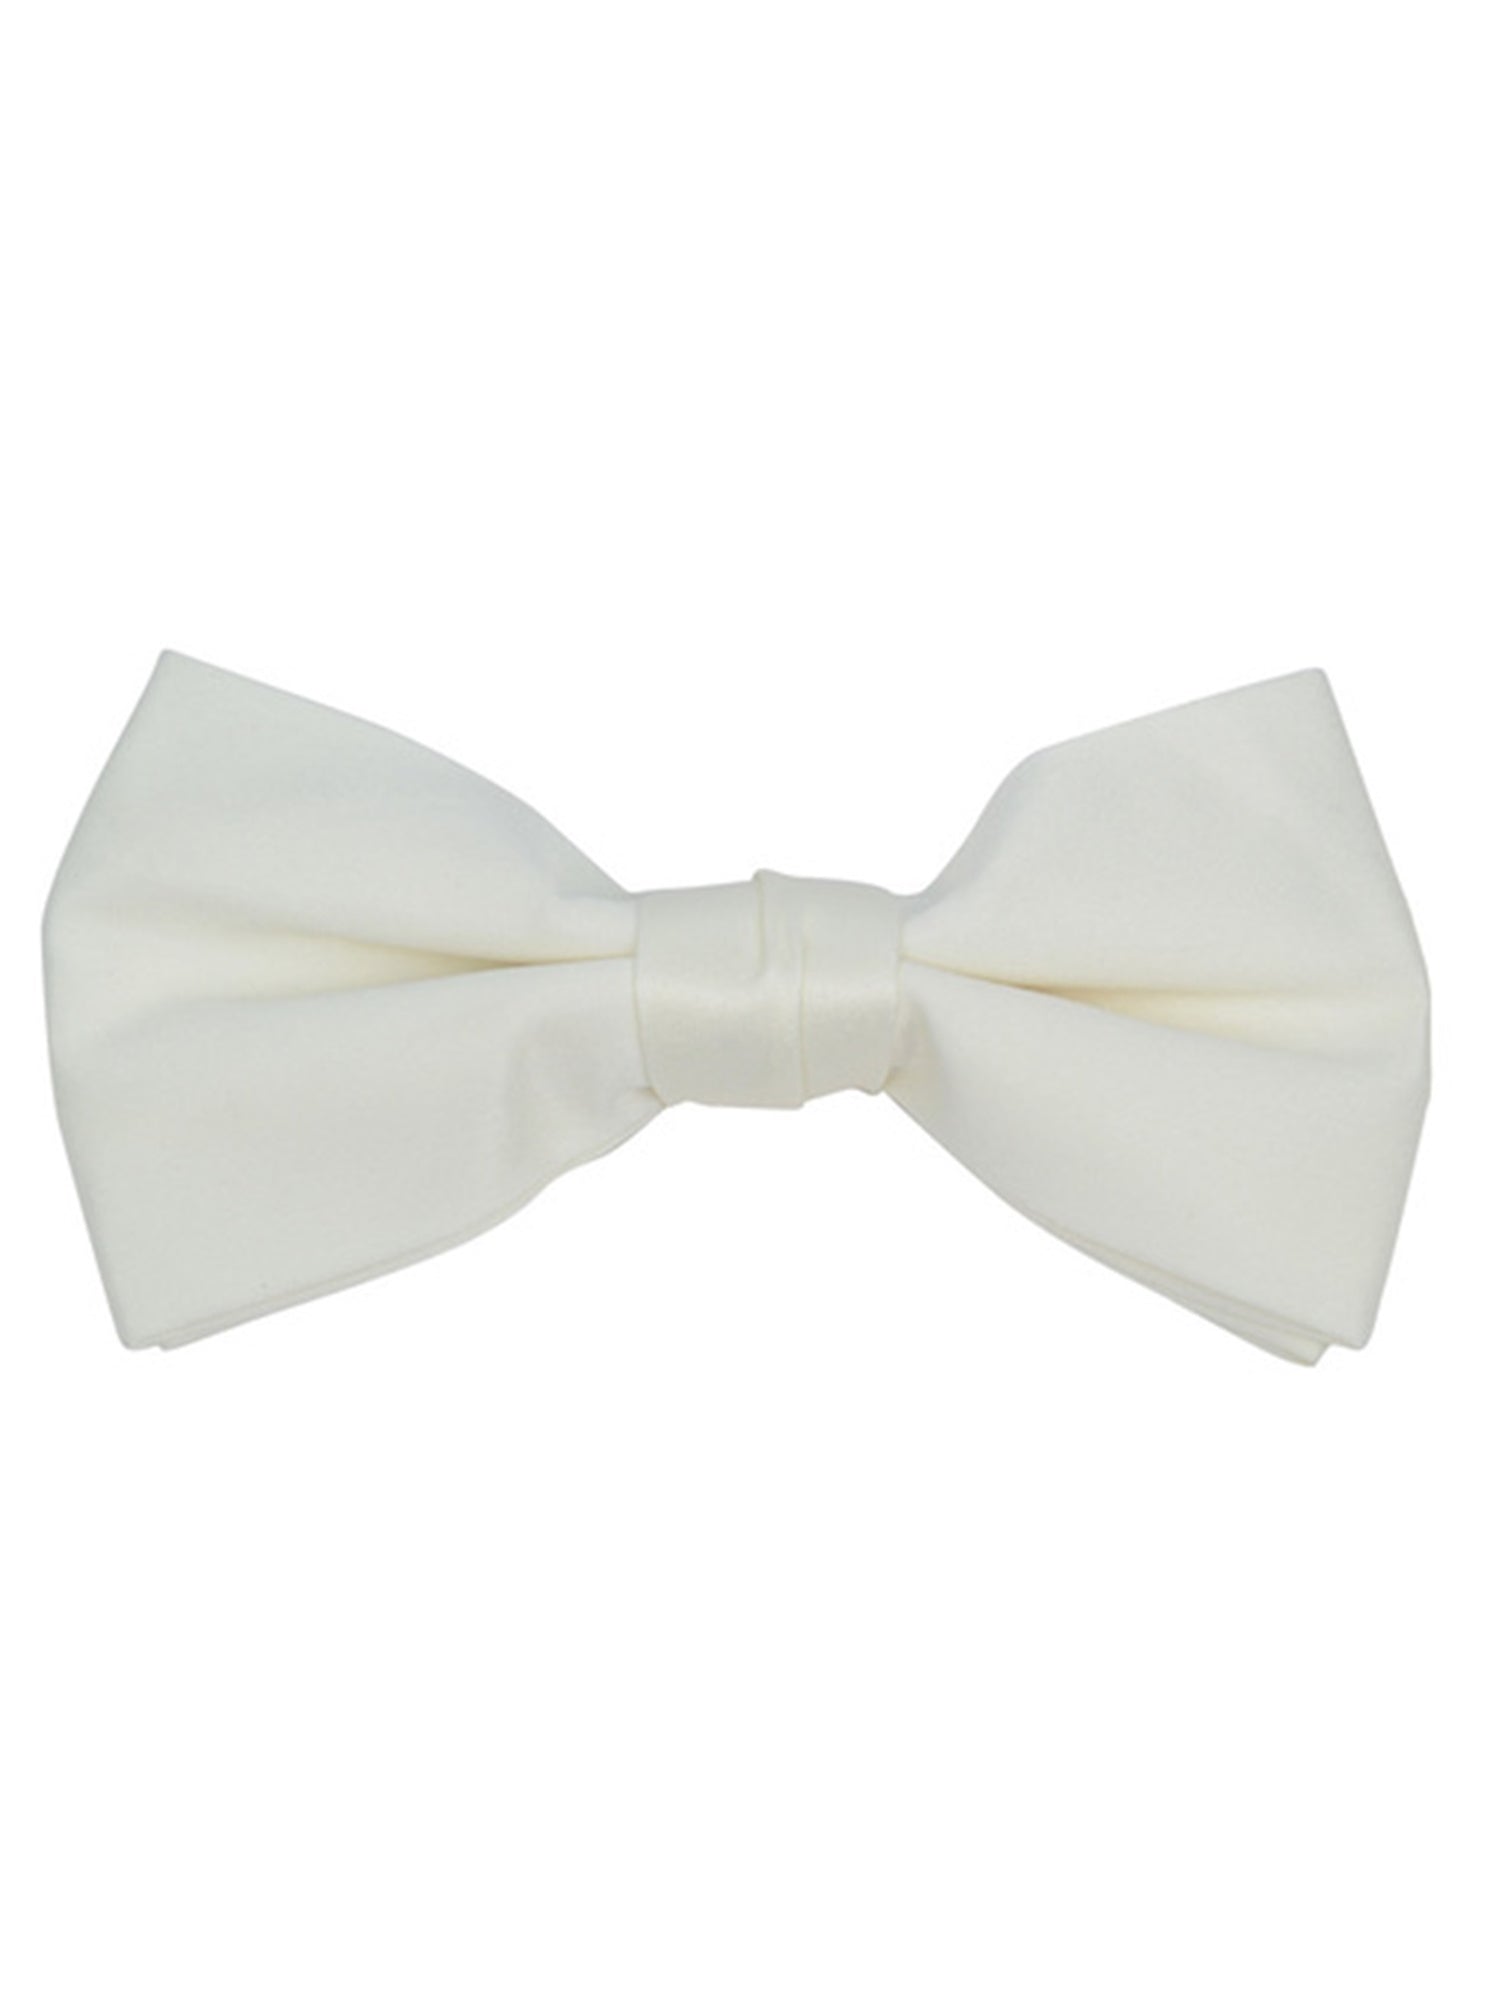 Young Boy's Pre-tied Adjustable Length Bow Tie - Formal Tuxedo Solid Color Boy's Solid Color Bow Tie TheDapperTie Ivory One Size 